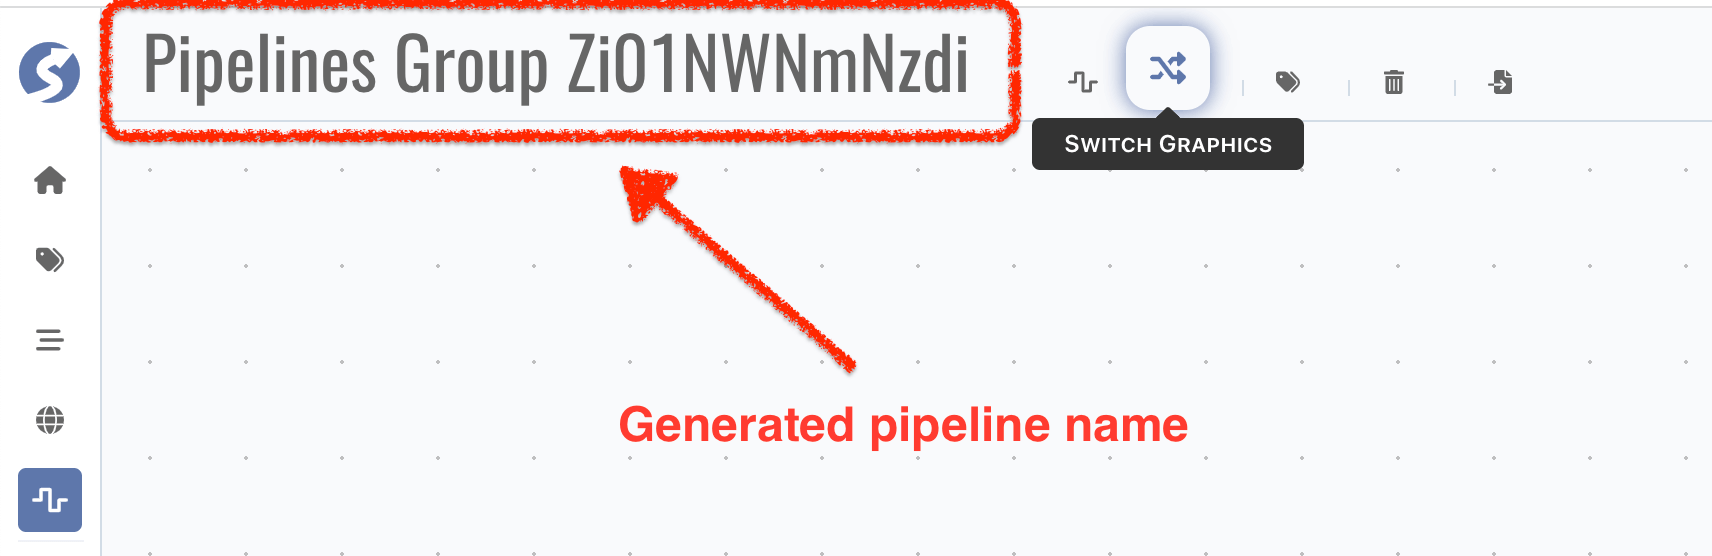 A New Pipeline Catalog